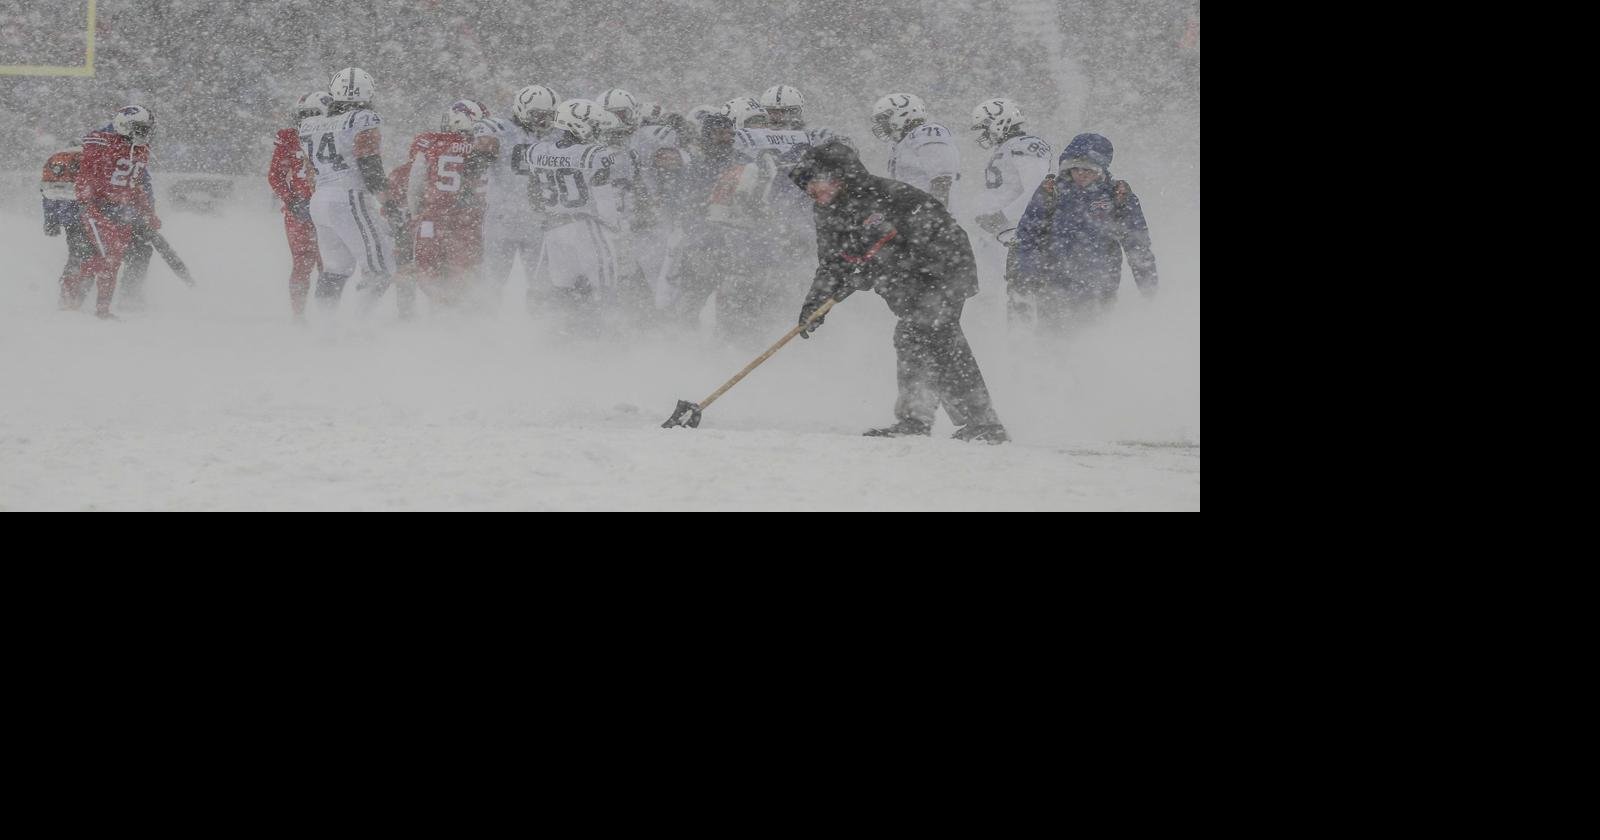 Bills snow games: Reliving Buffalo's wildest weather from years